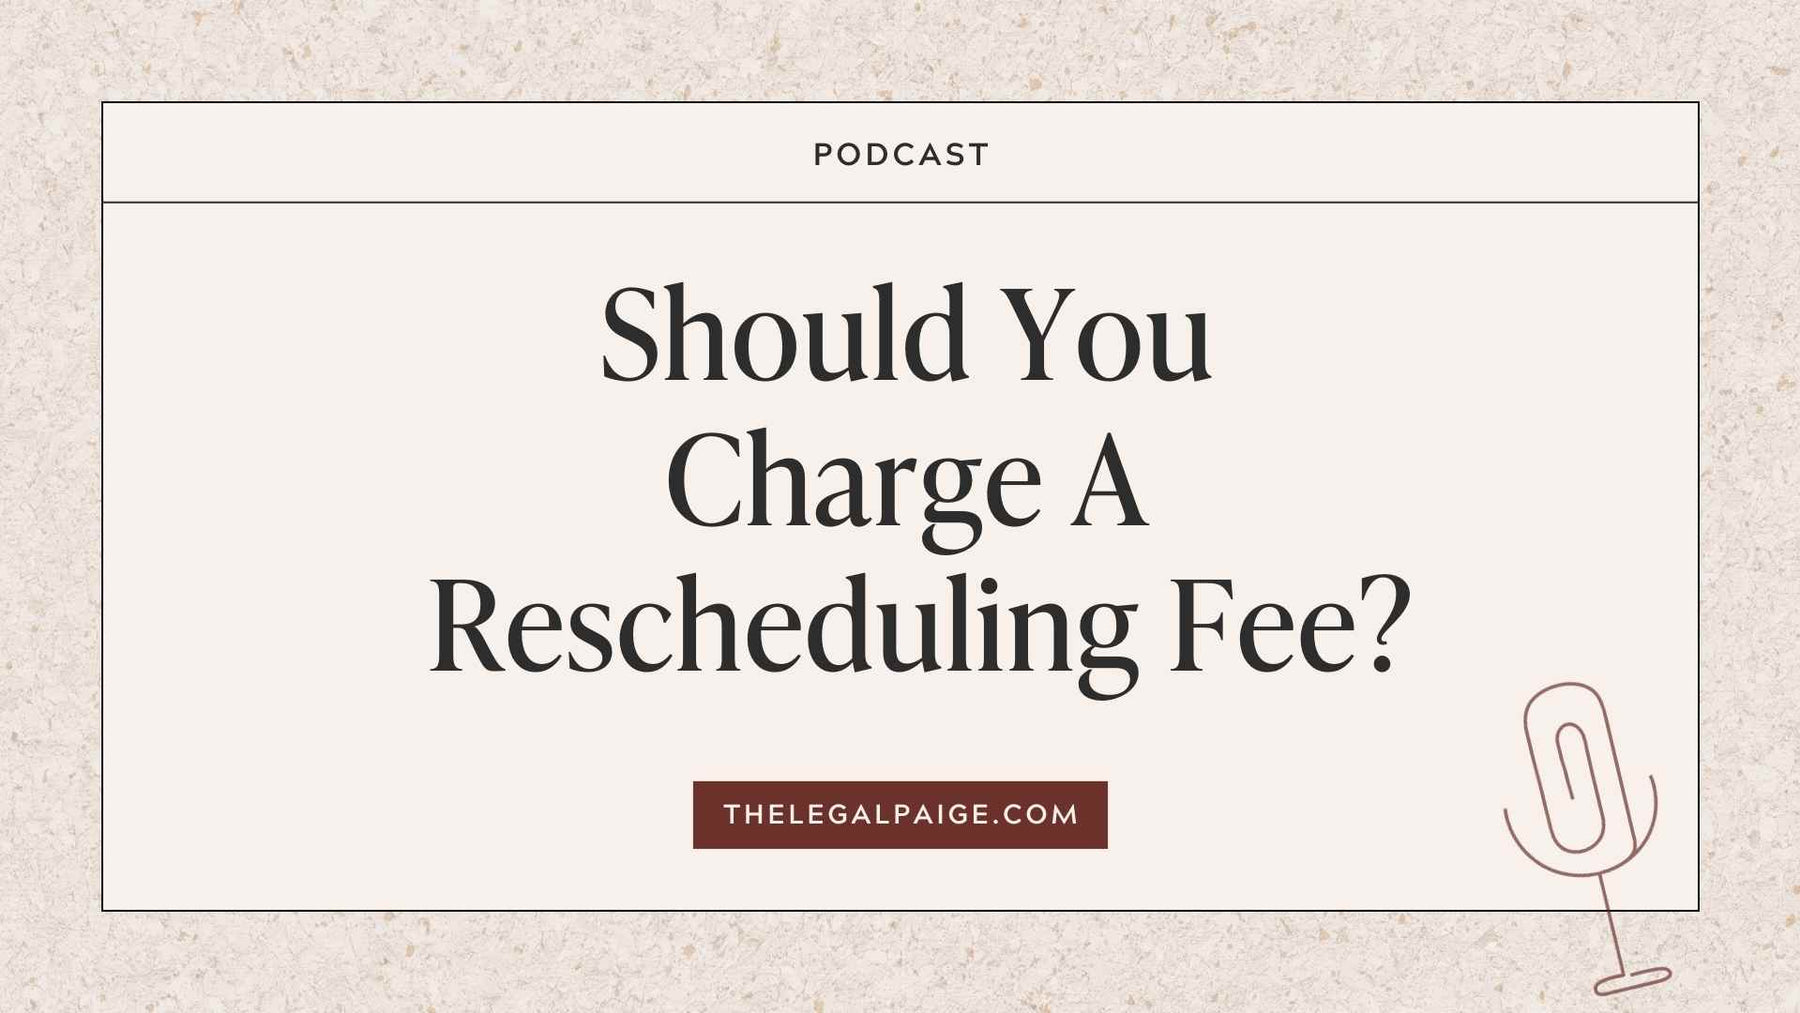 Episode 73: Should You Charge A Rescheduling Fee?